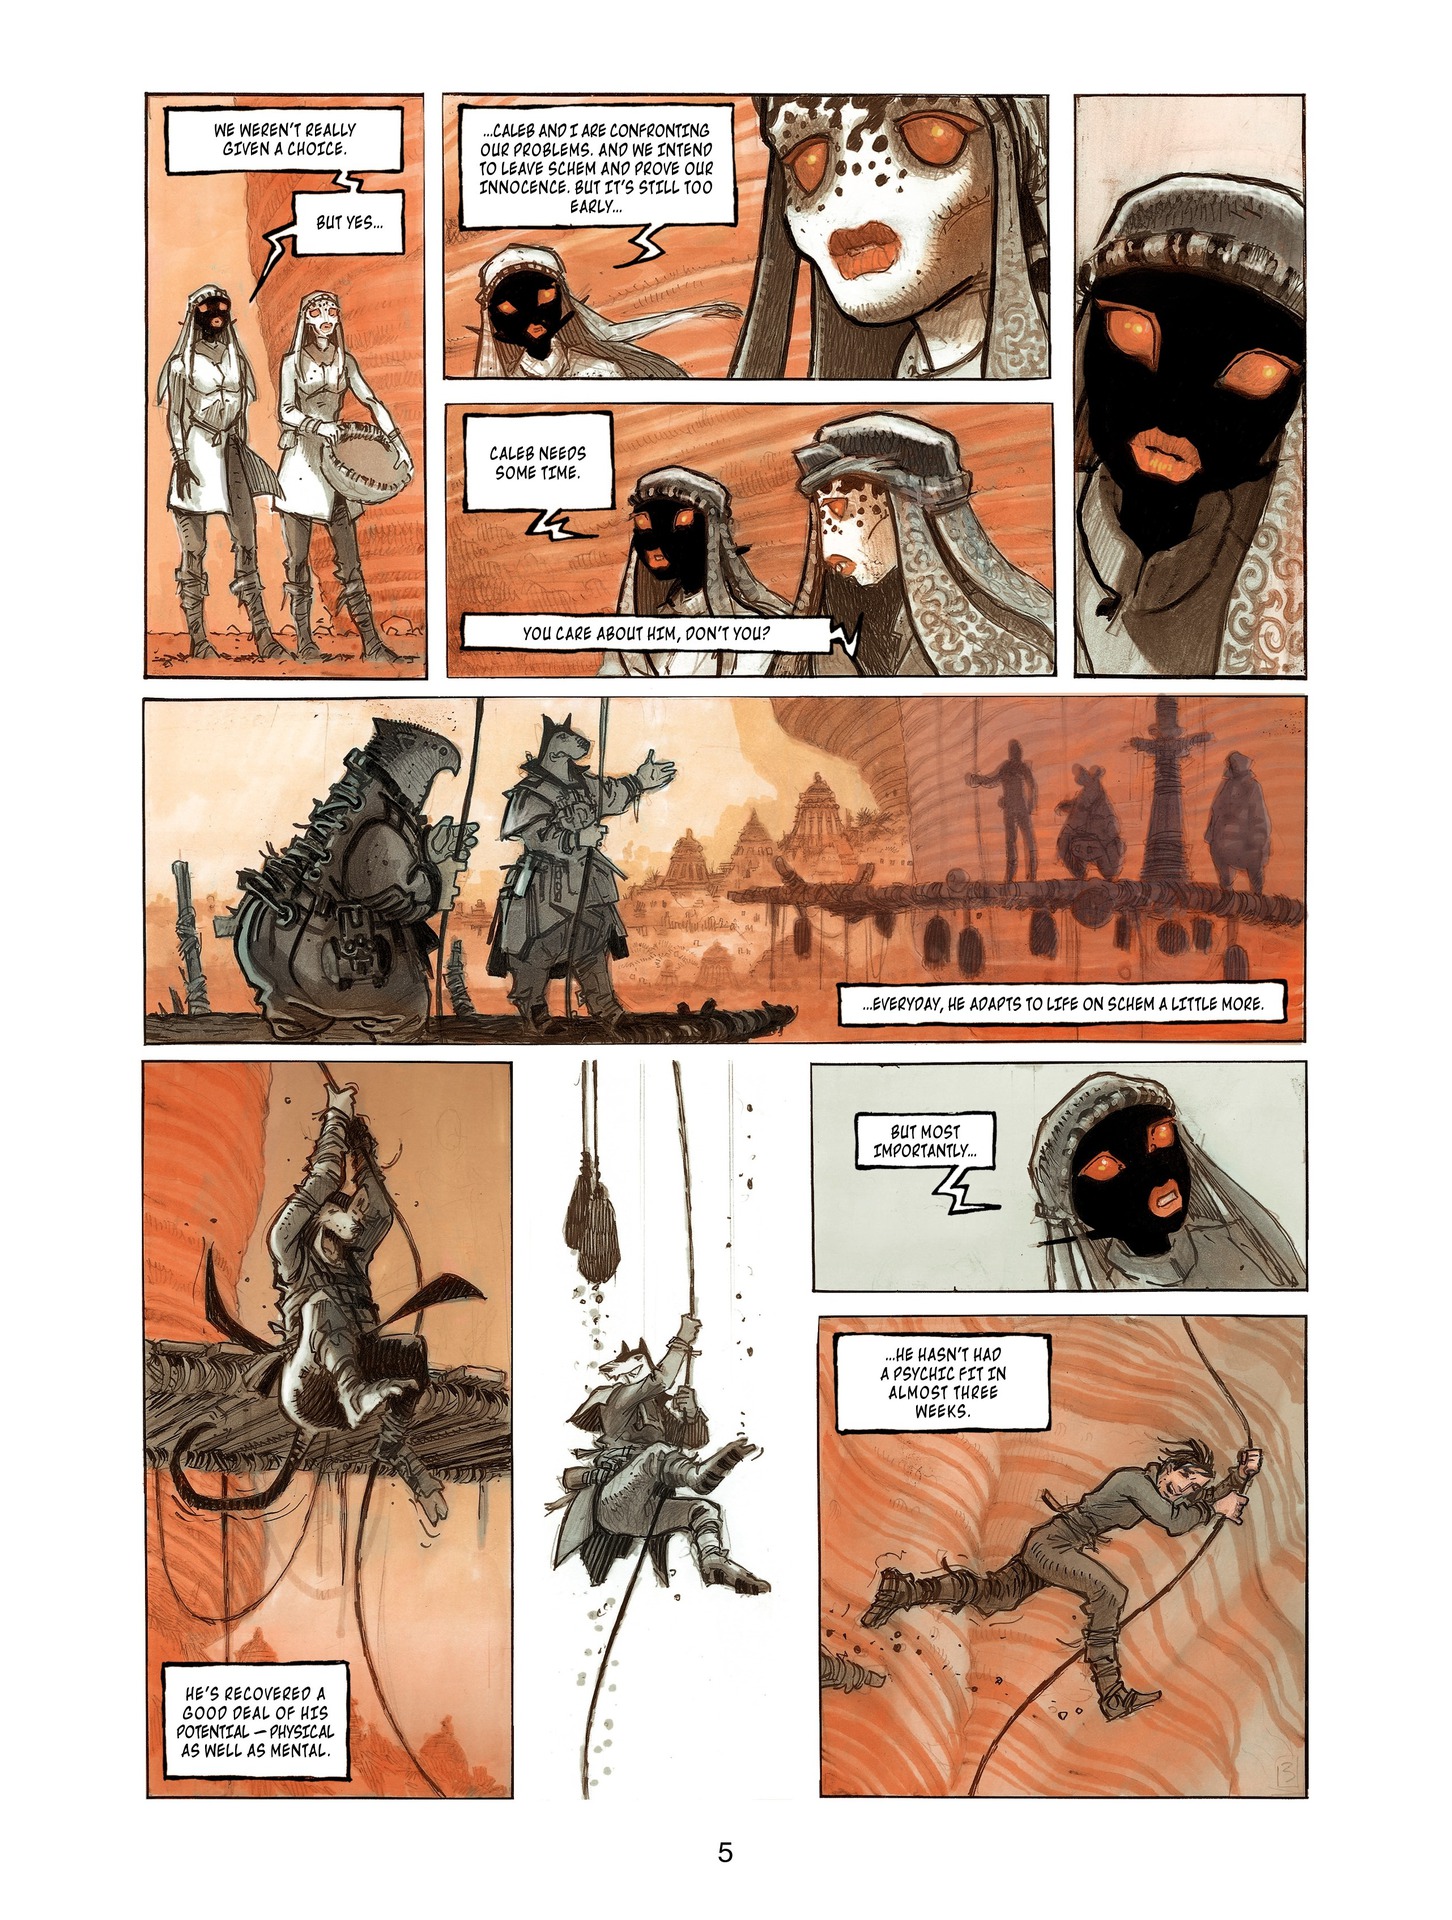 Orbital (2009-): Chapter 6 - Page 5